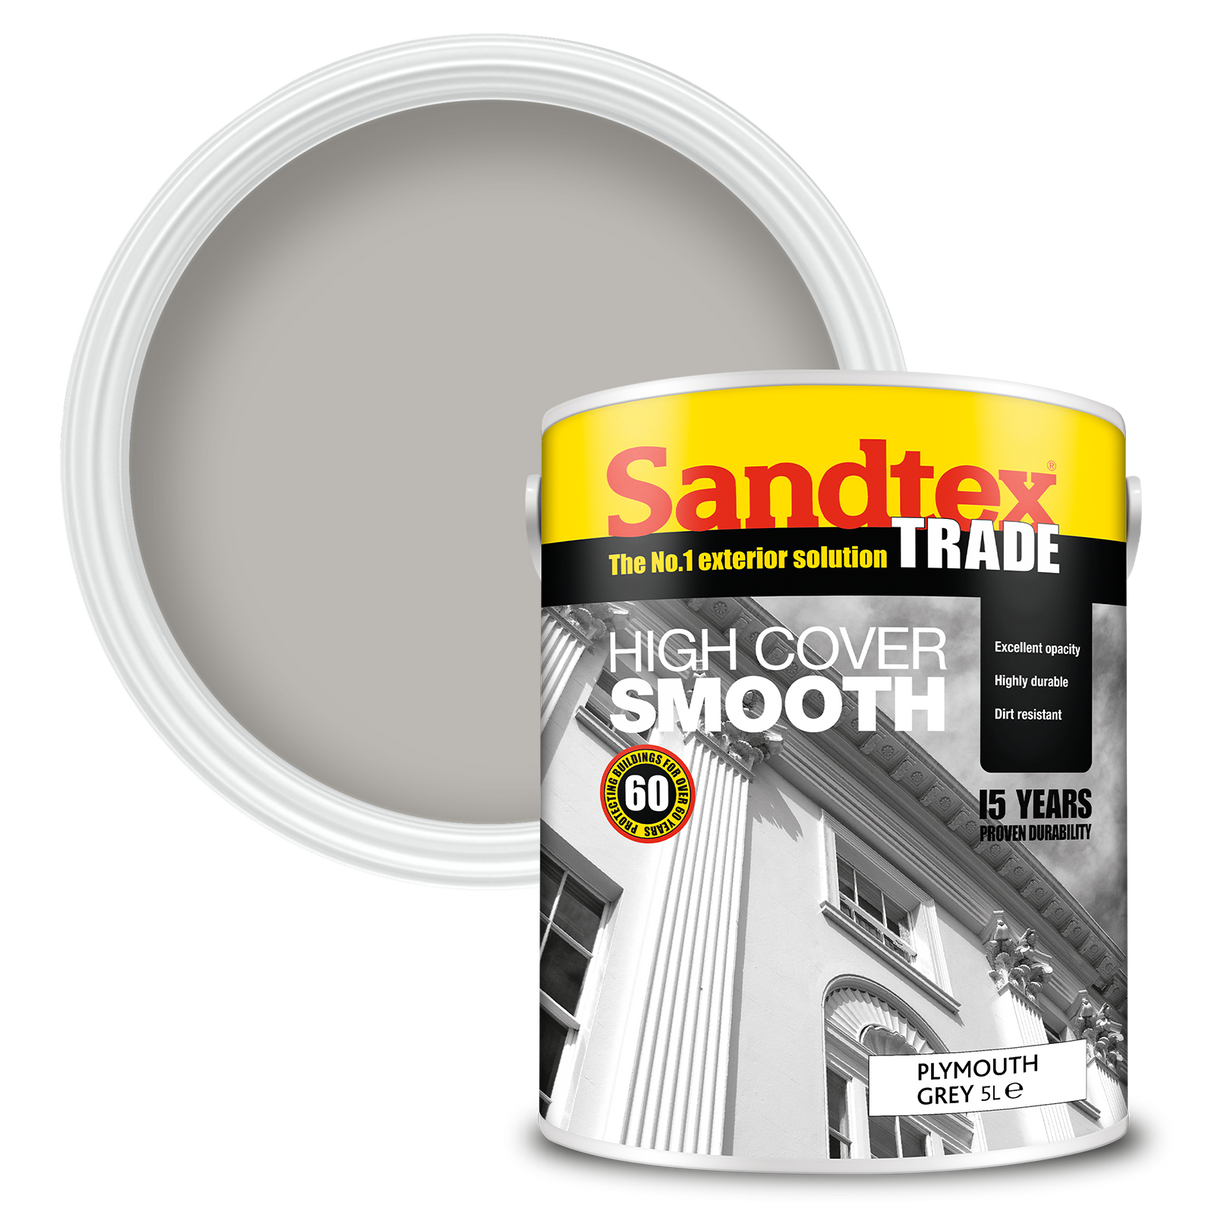 Sandtex-Trade-High-Cover-Smooth-Plymouth-Grey-5L